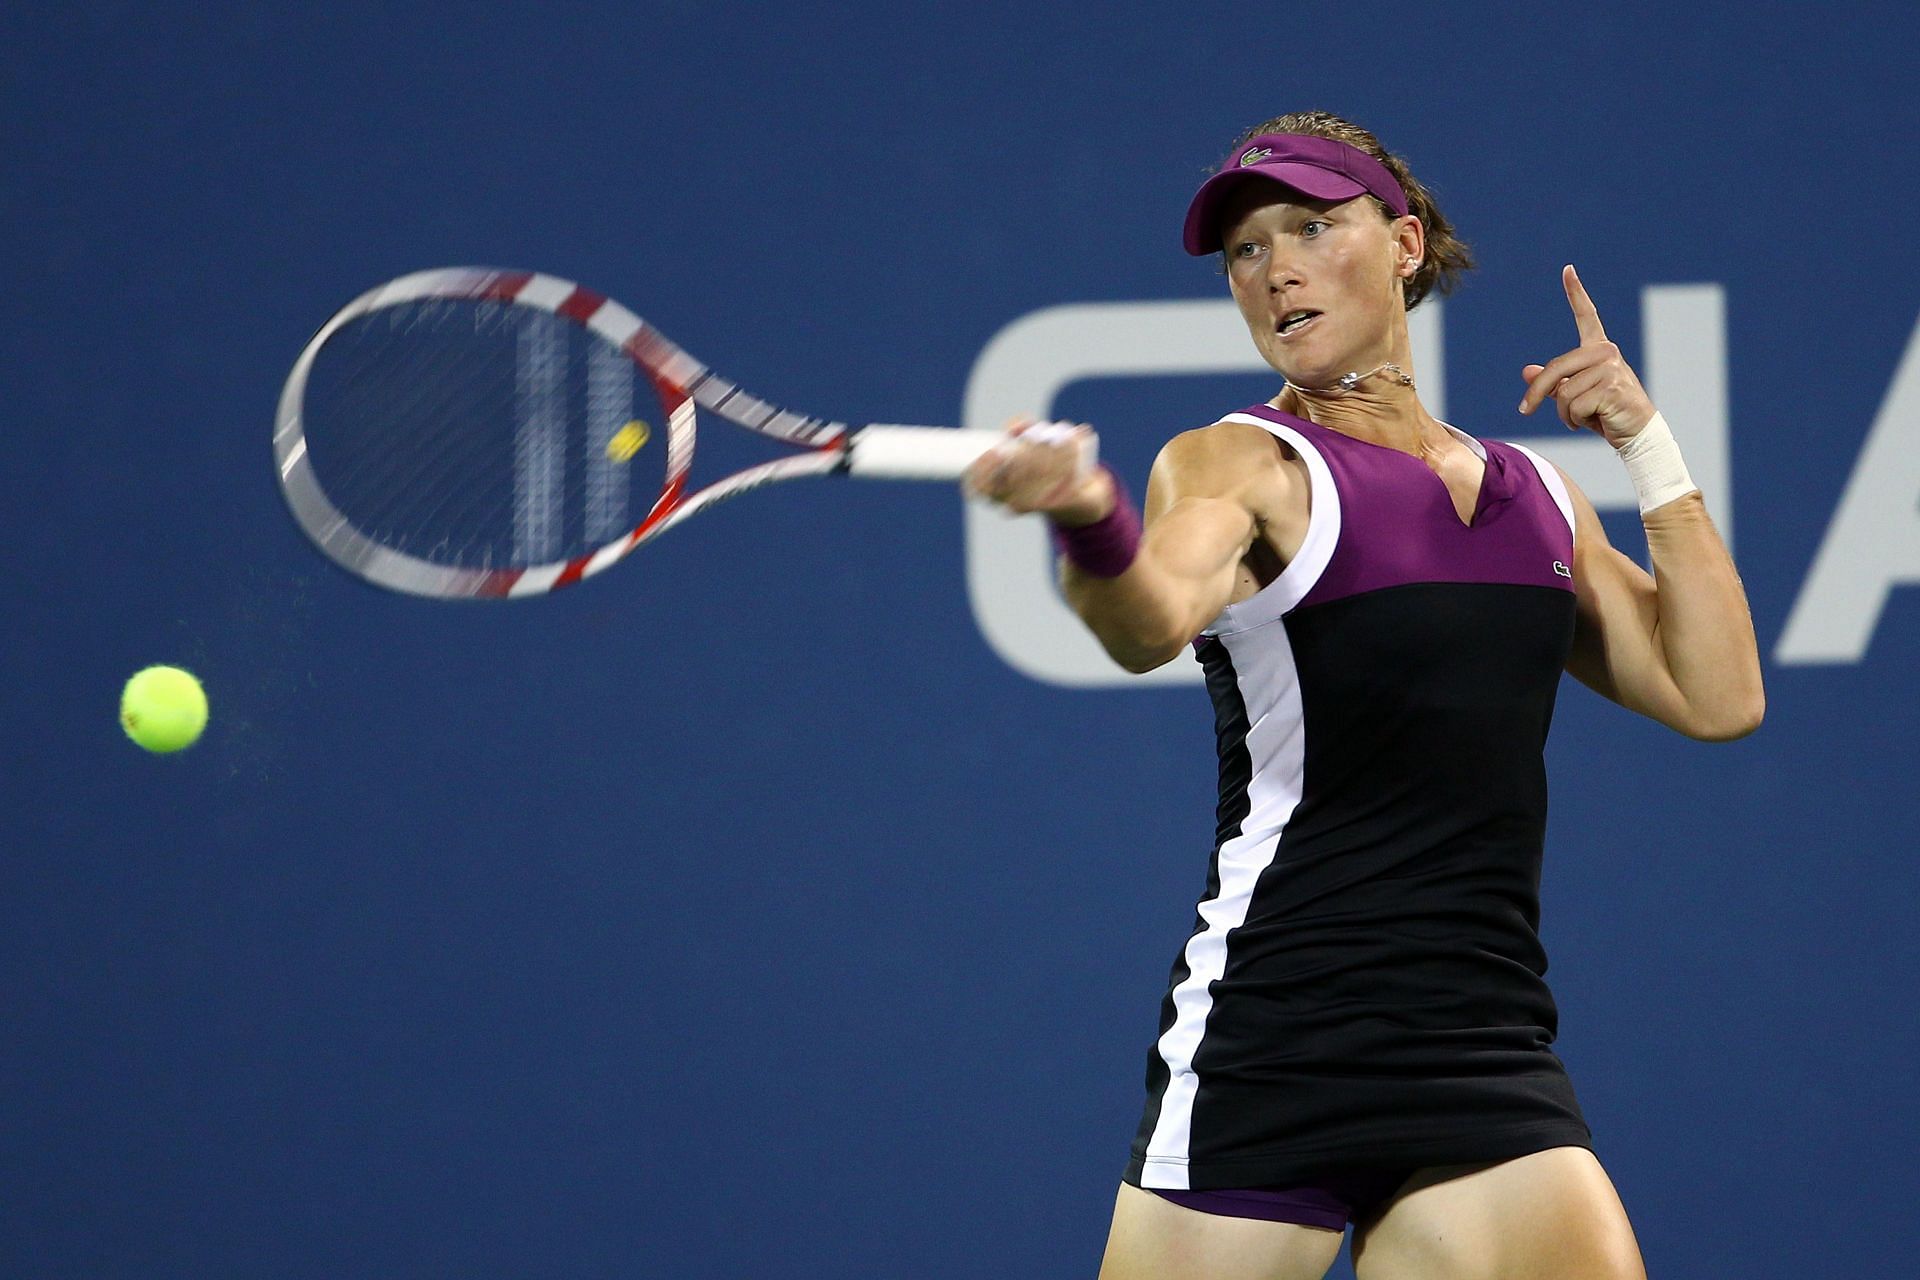 Samantha Stosur is playing in her last singles Grand Slam event